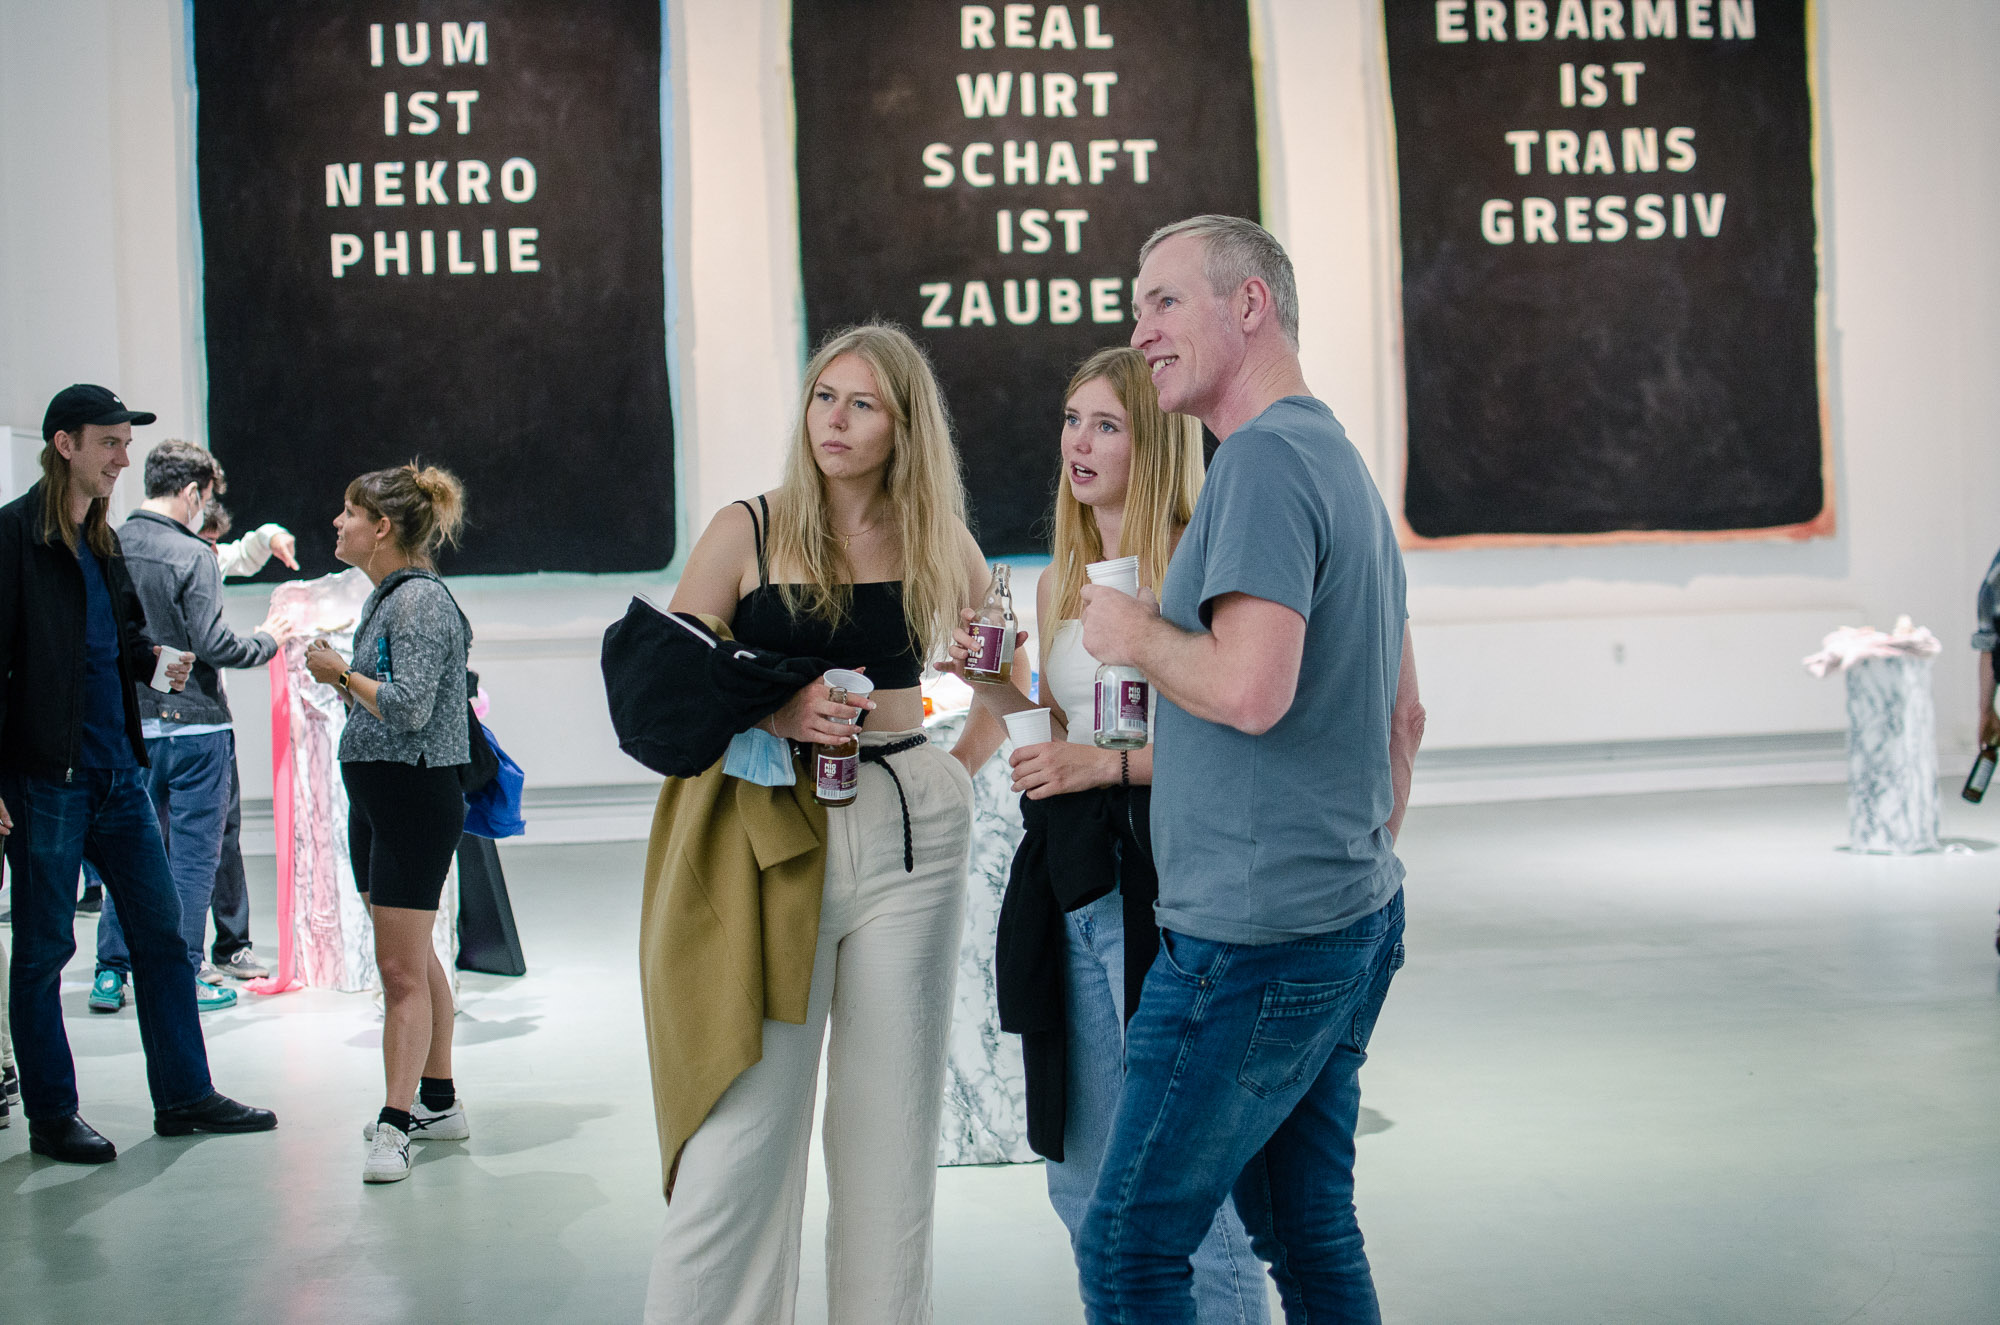 PKRD-48-Airy-Democratic-Spirituality-vernissage-PK-at-Alte-Handlesschule-20.08.21-Fanni-Papp-for-PK-23